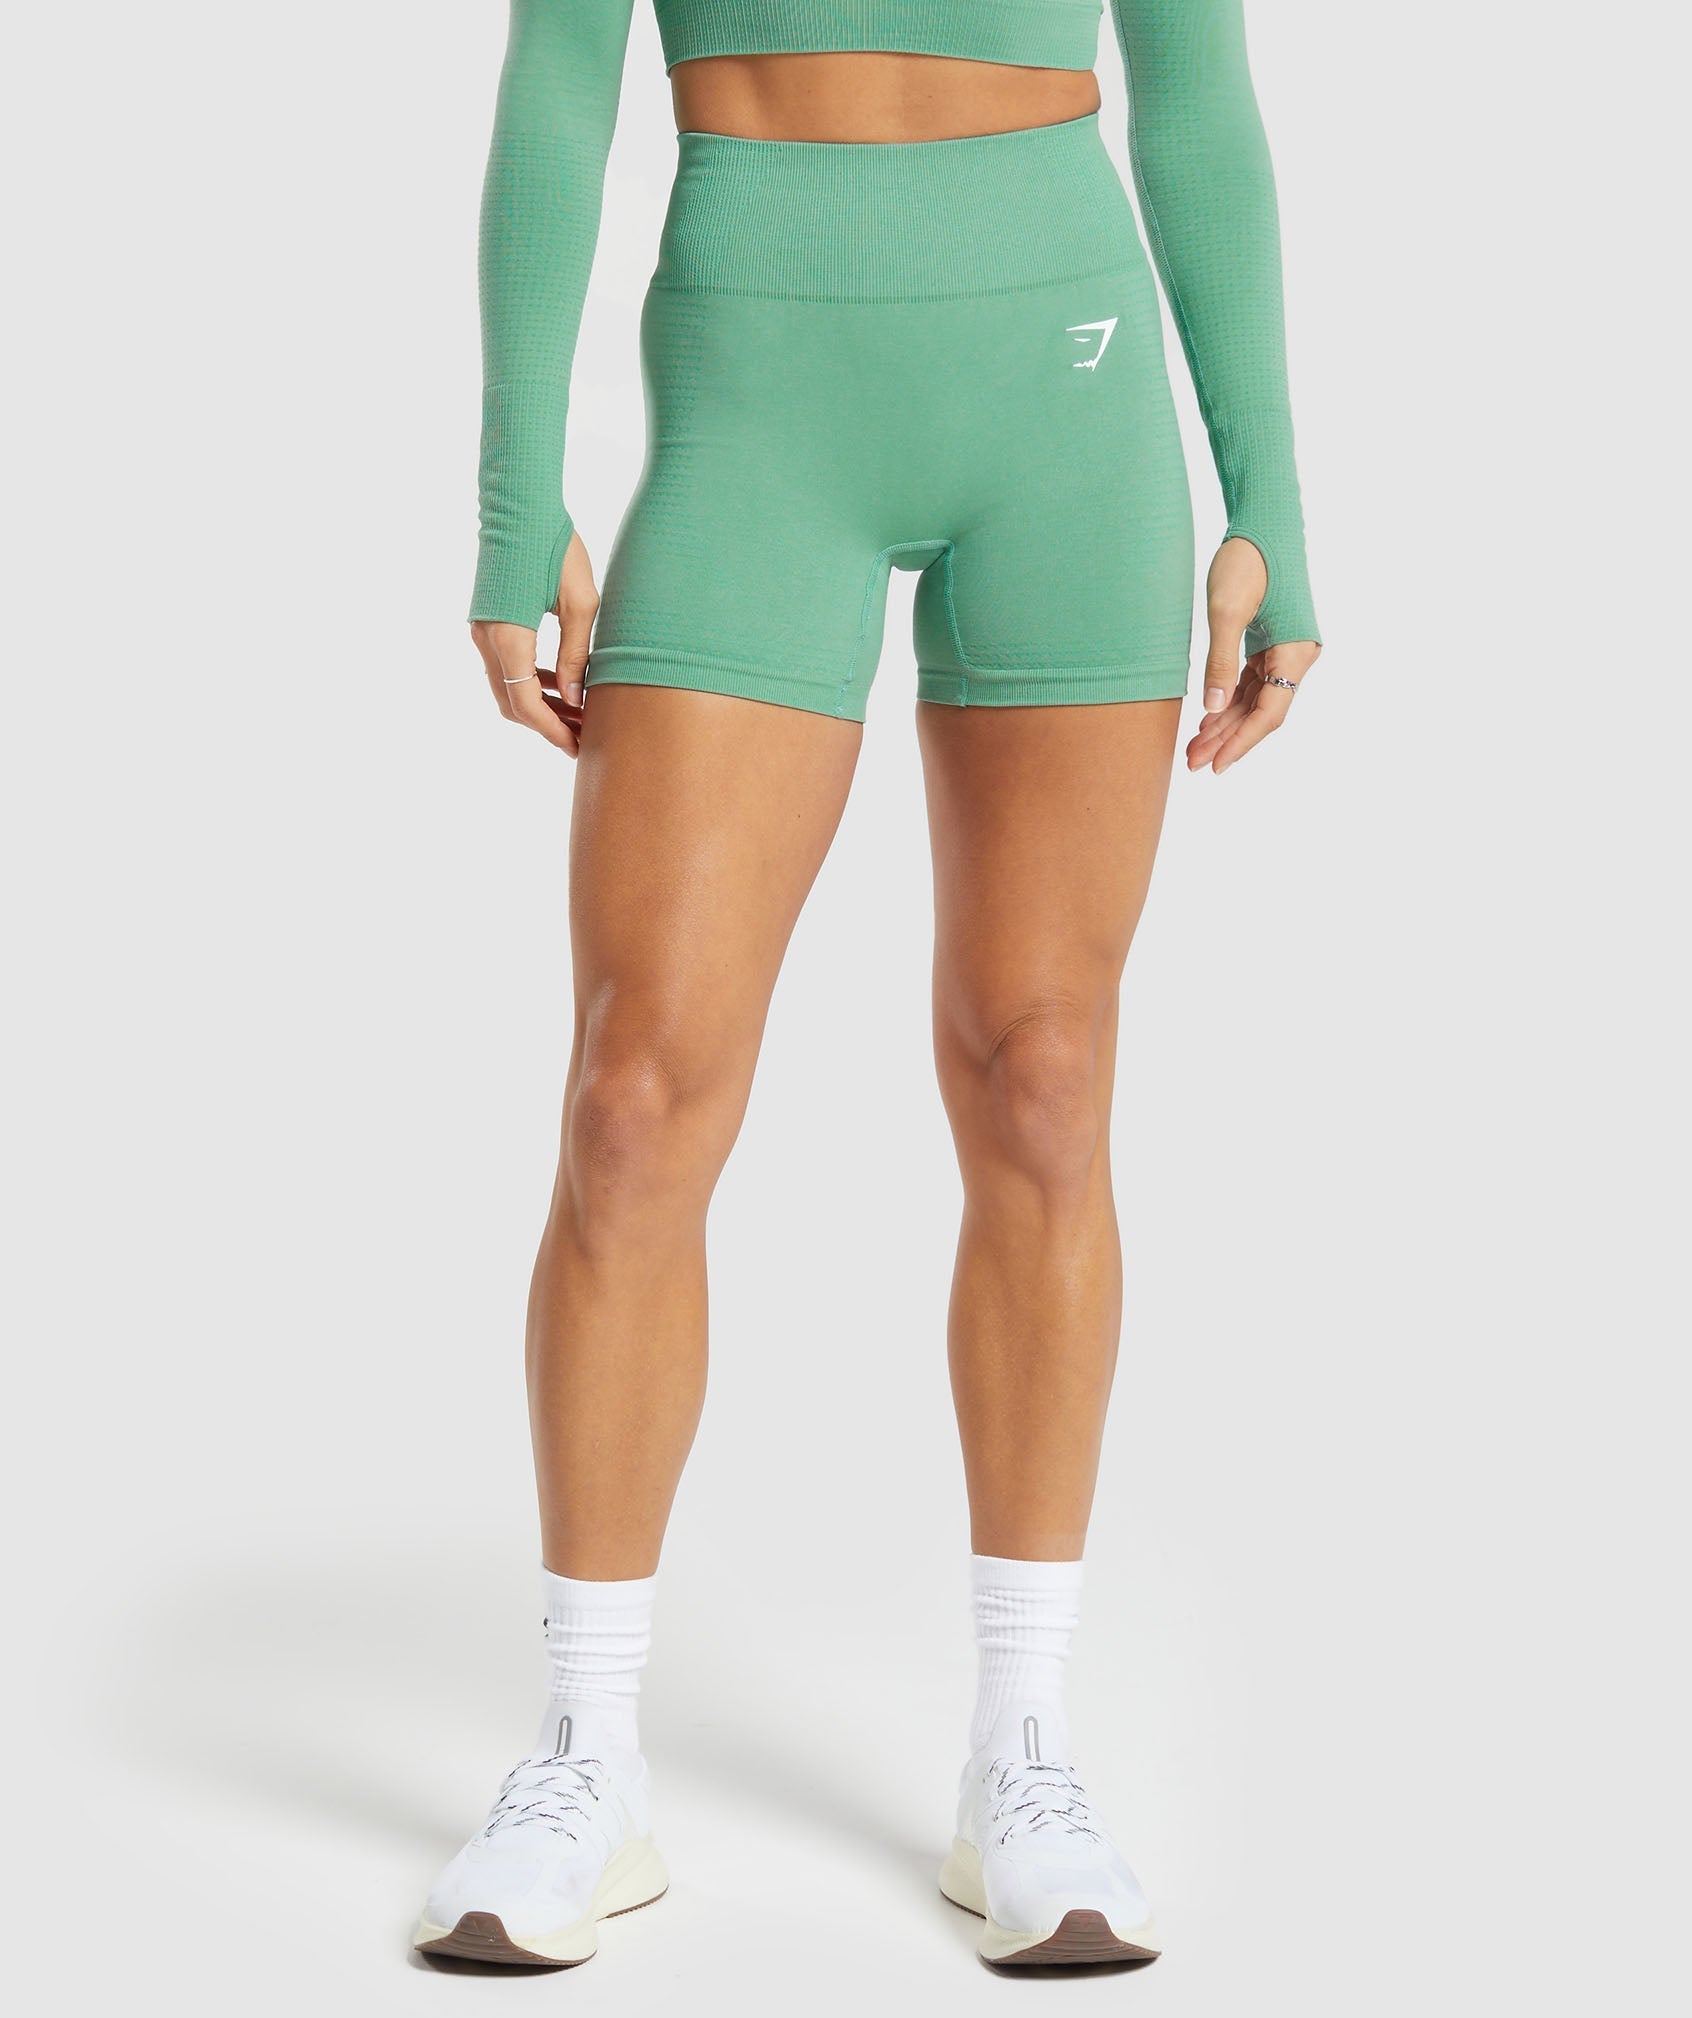 Vital Seamless 2.0 Shorts in Lagoon Green/ Marl is out of stock